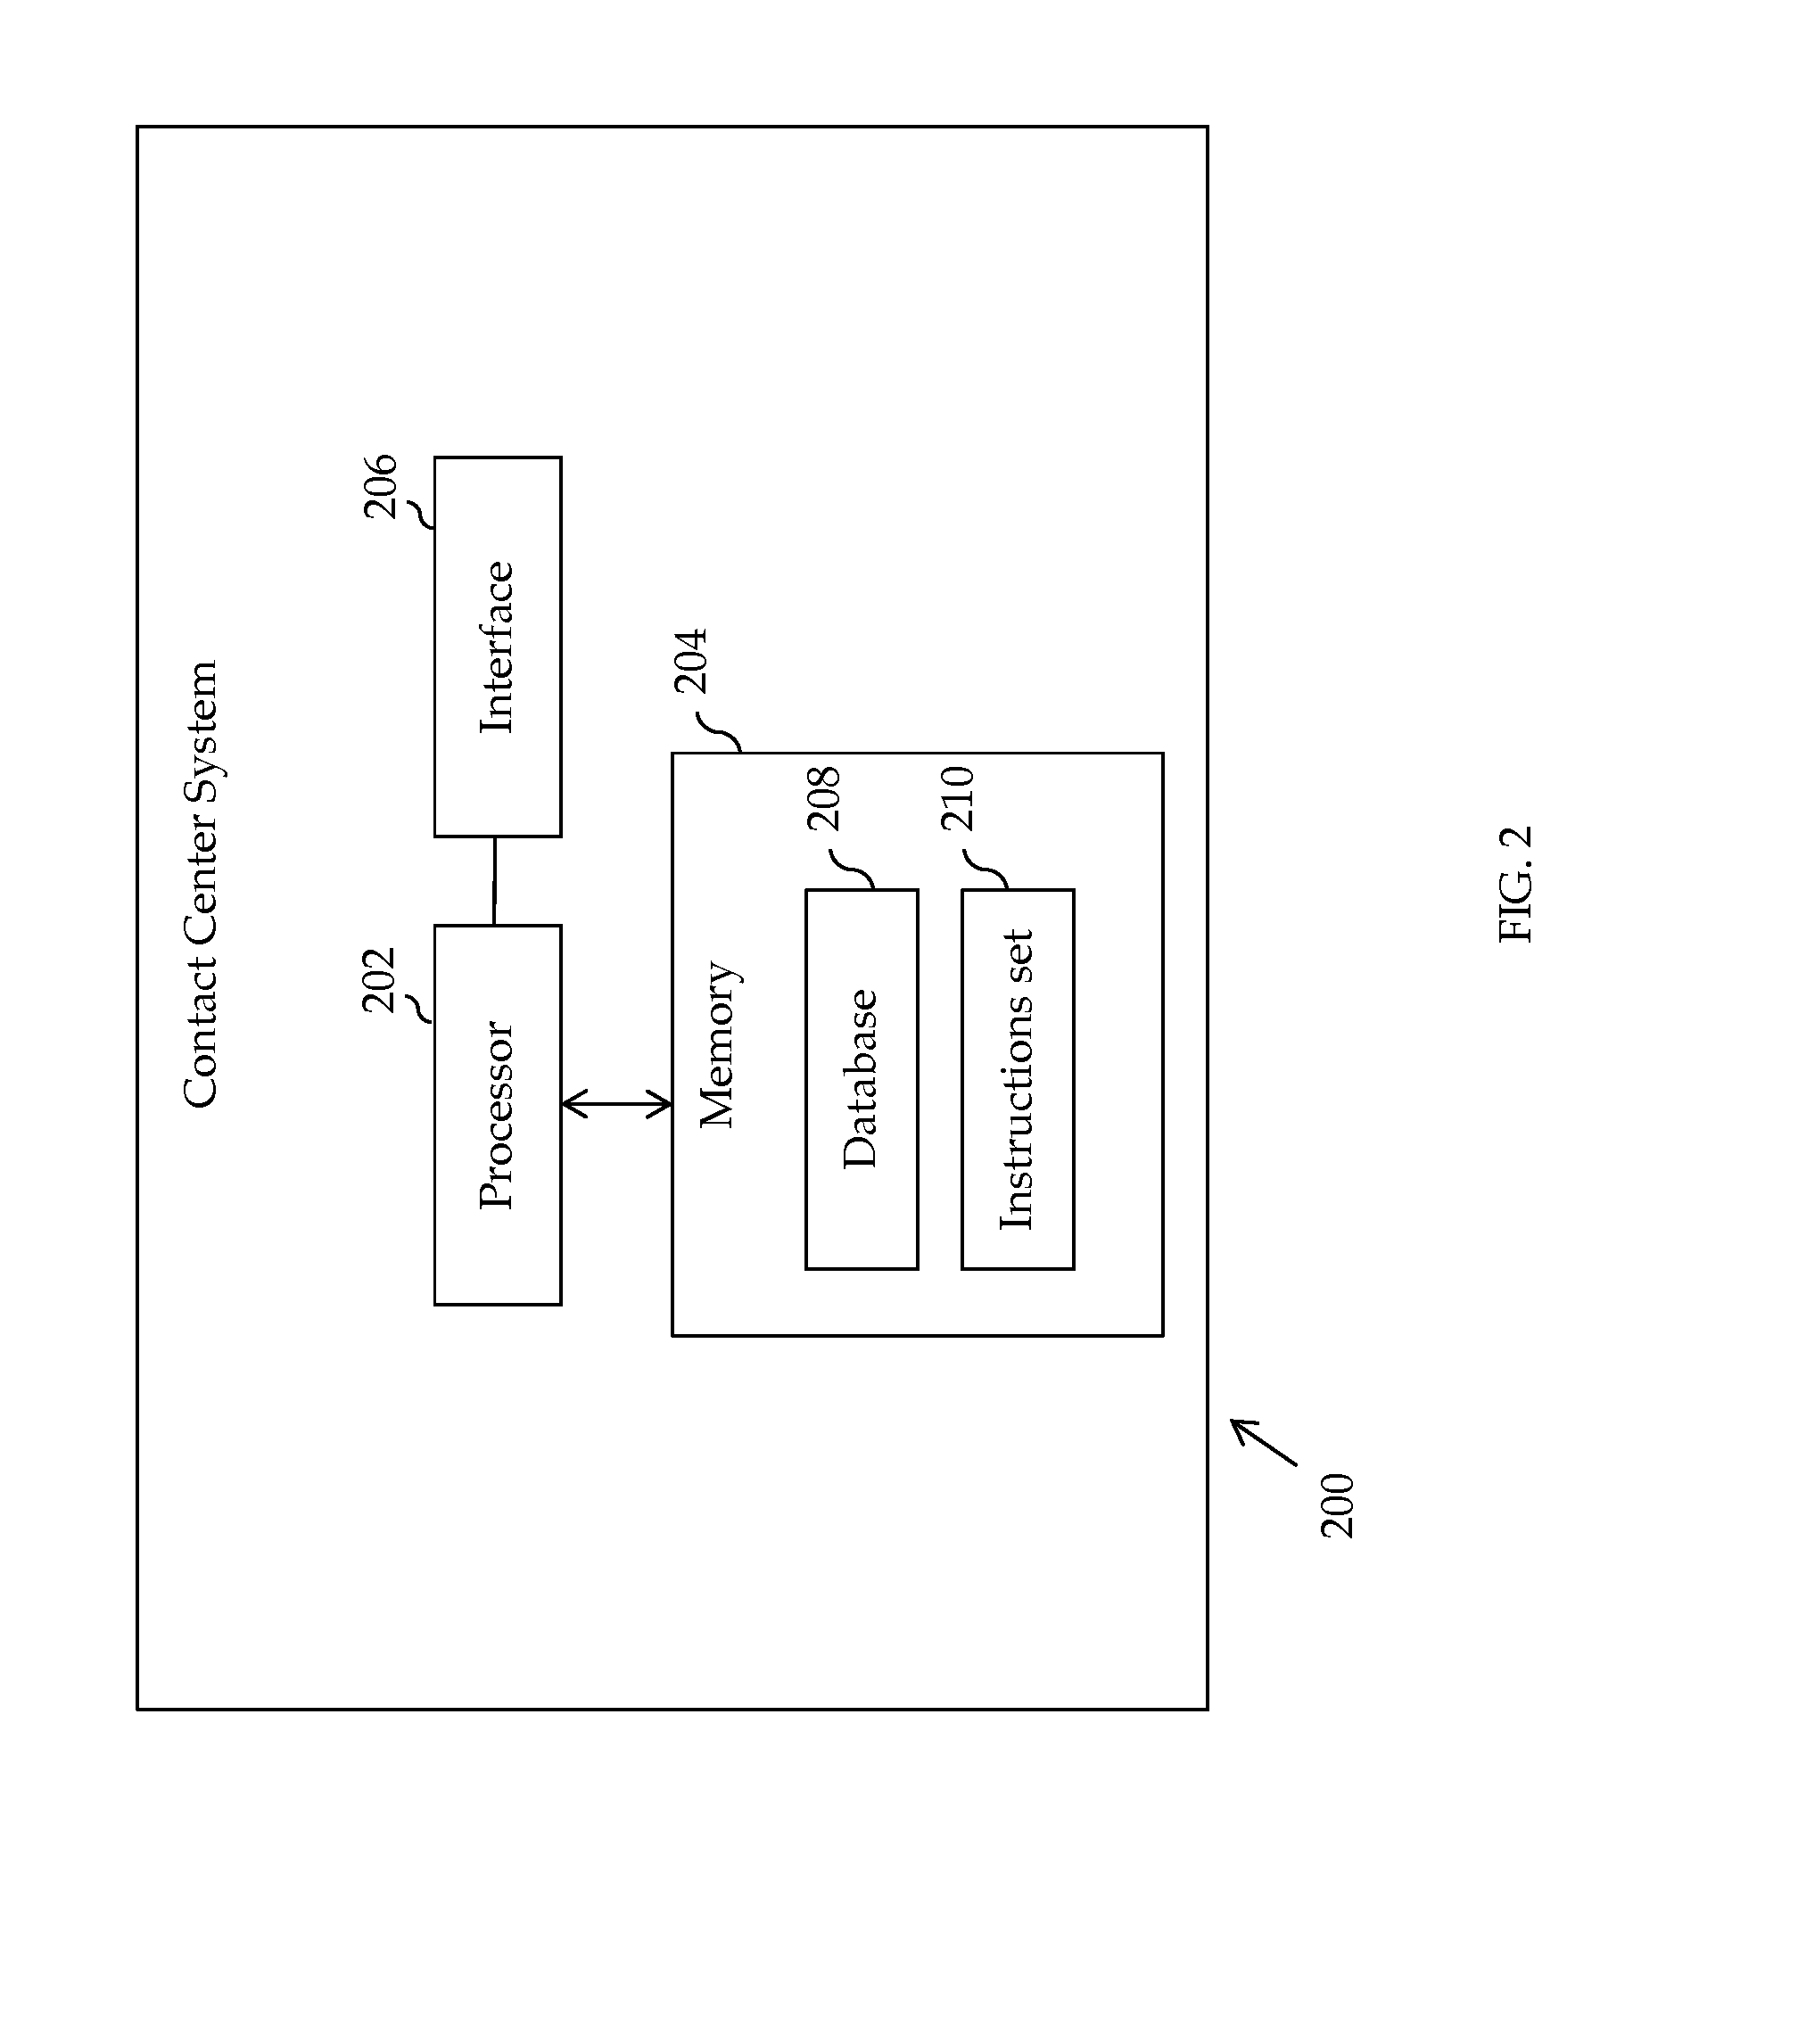 Method and system for optimizing performance within a contact center